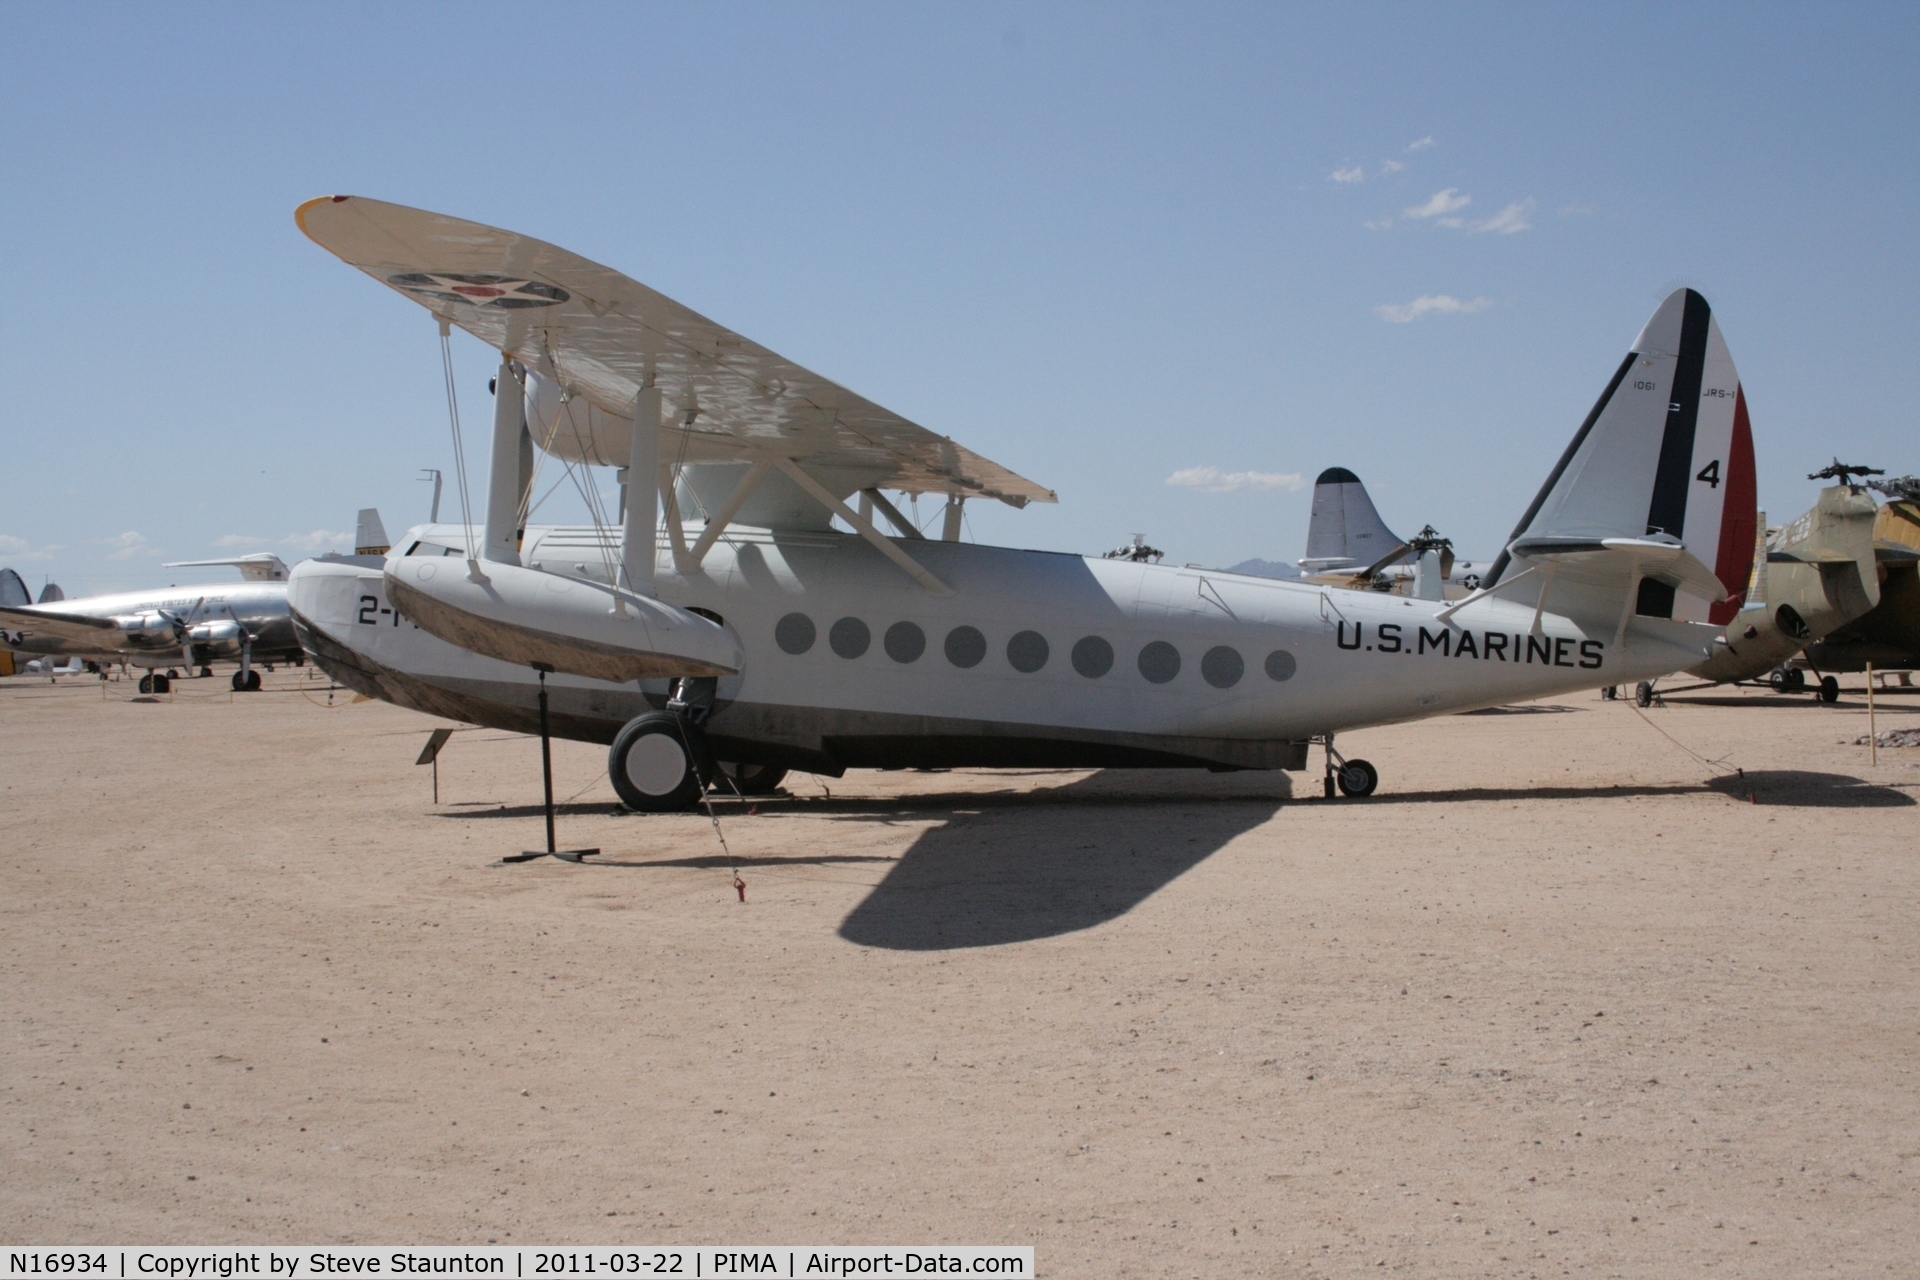 N16934, 1936 Sikorsky S-43 C/N 4325, Taken at Pima Air and Space Museum, in March 2011 whilst on an Aeroprint Aviation tour